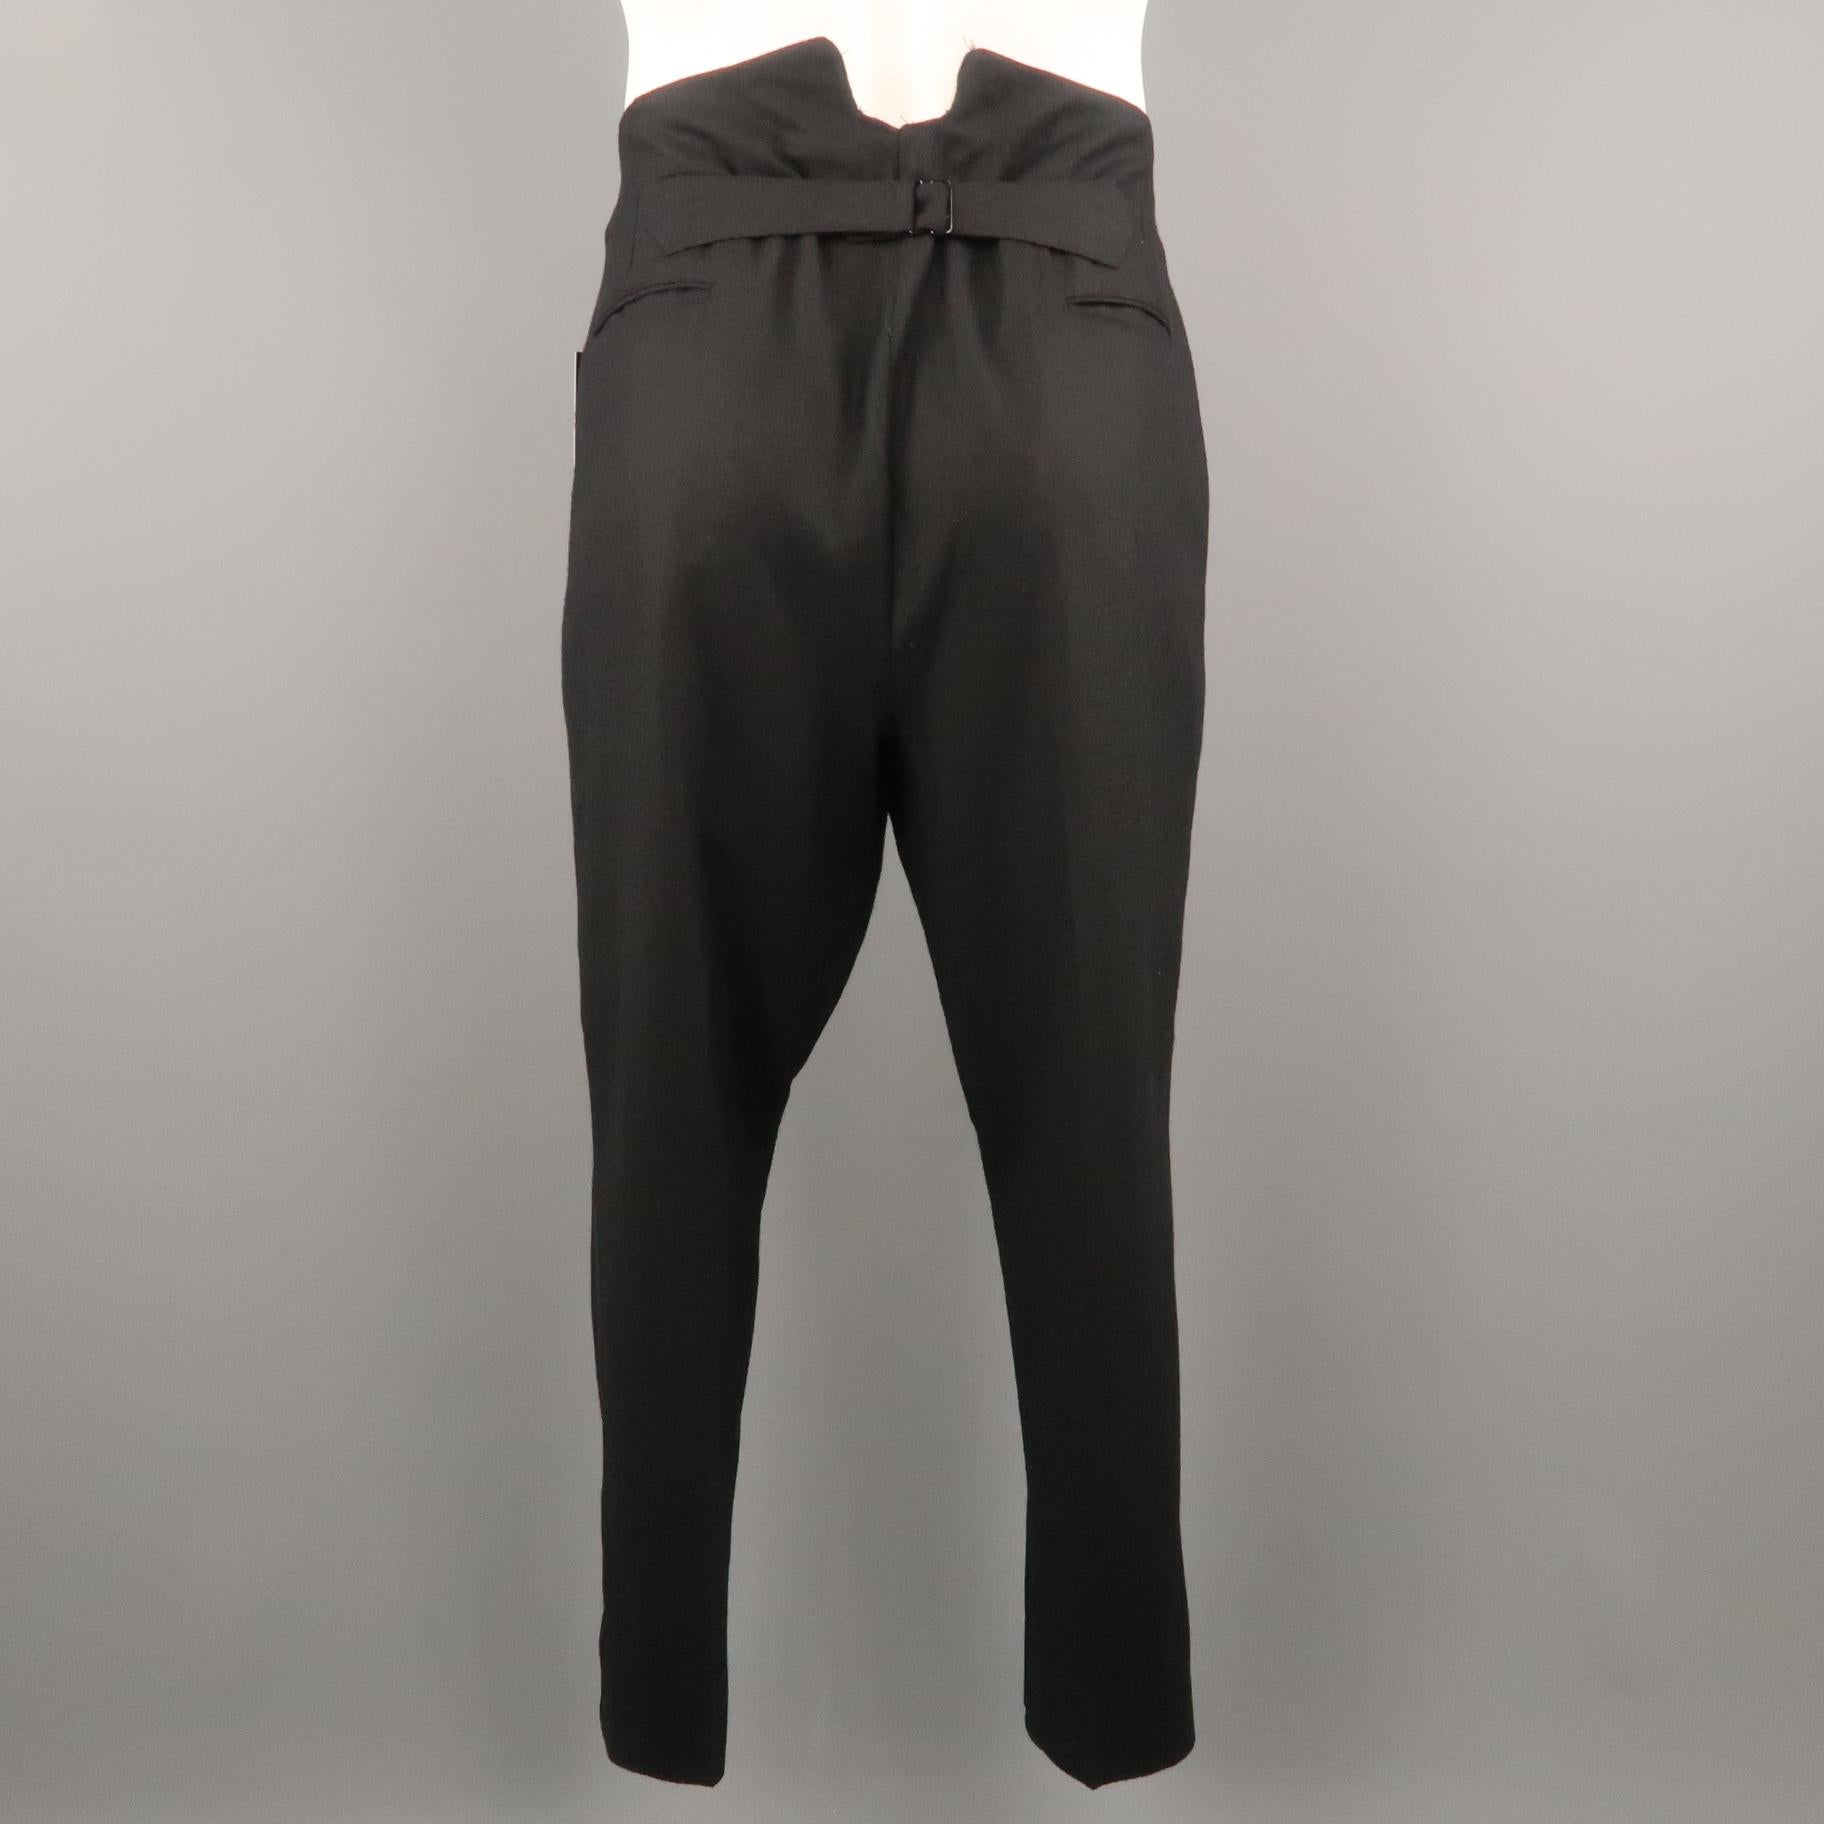 RRL by RALPH LAUREN dress pant comes in a black wool featuring a side ribbon stripe trim, flat front style, back belt, and a button closure.
 
Excellent Pre-Owned Condition.
Marked: 34/32
 
Measurements:
 
Waist: 36 in.
Rise: 14 in.
Inseam: 30 in.